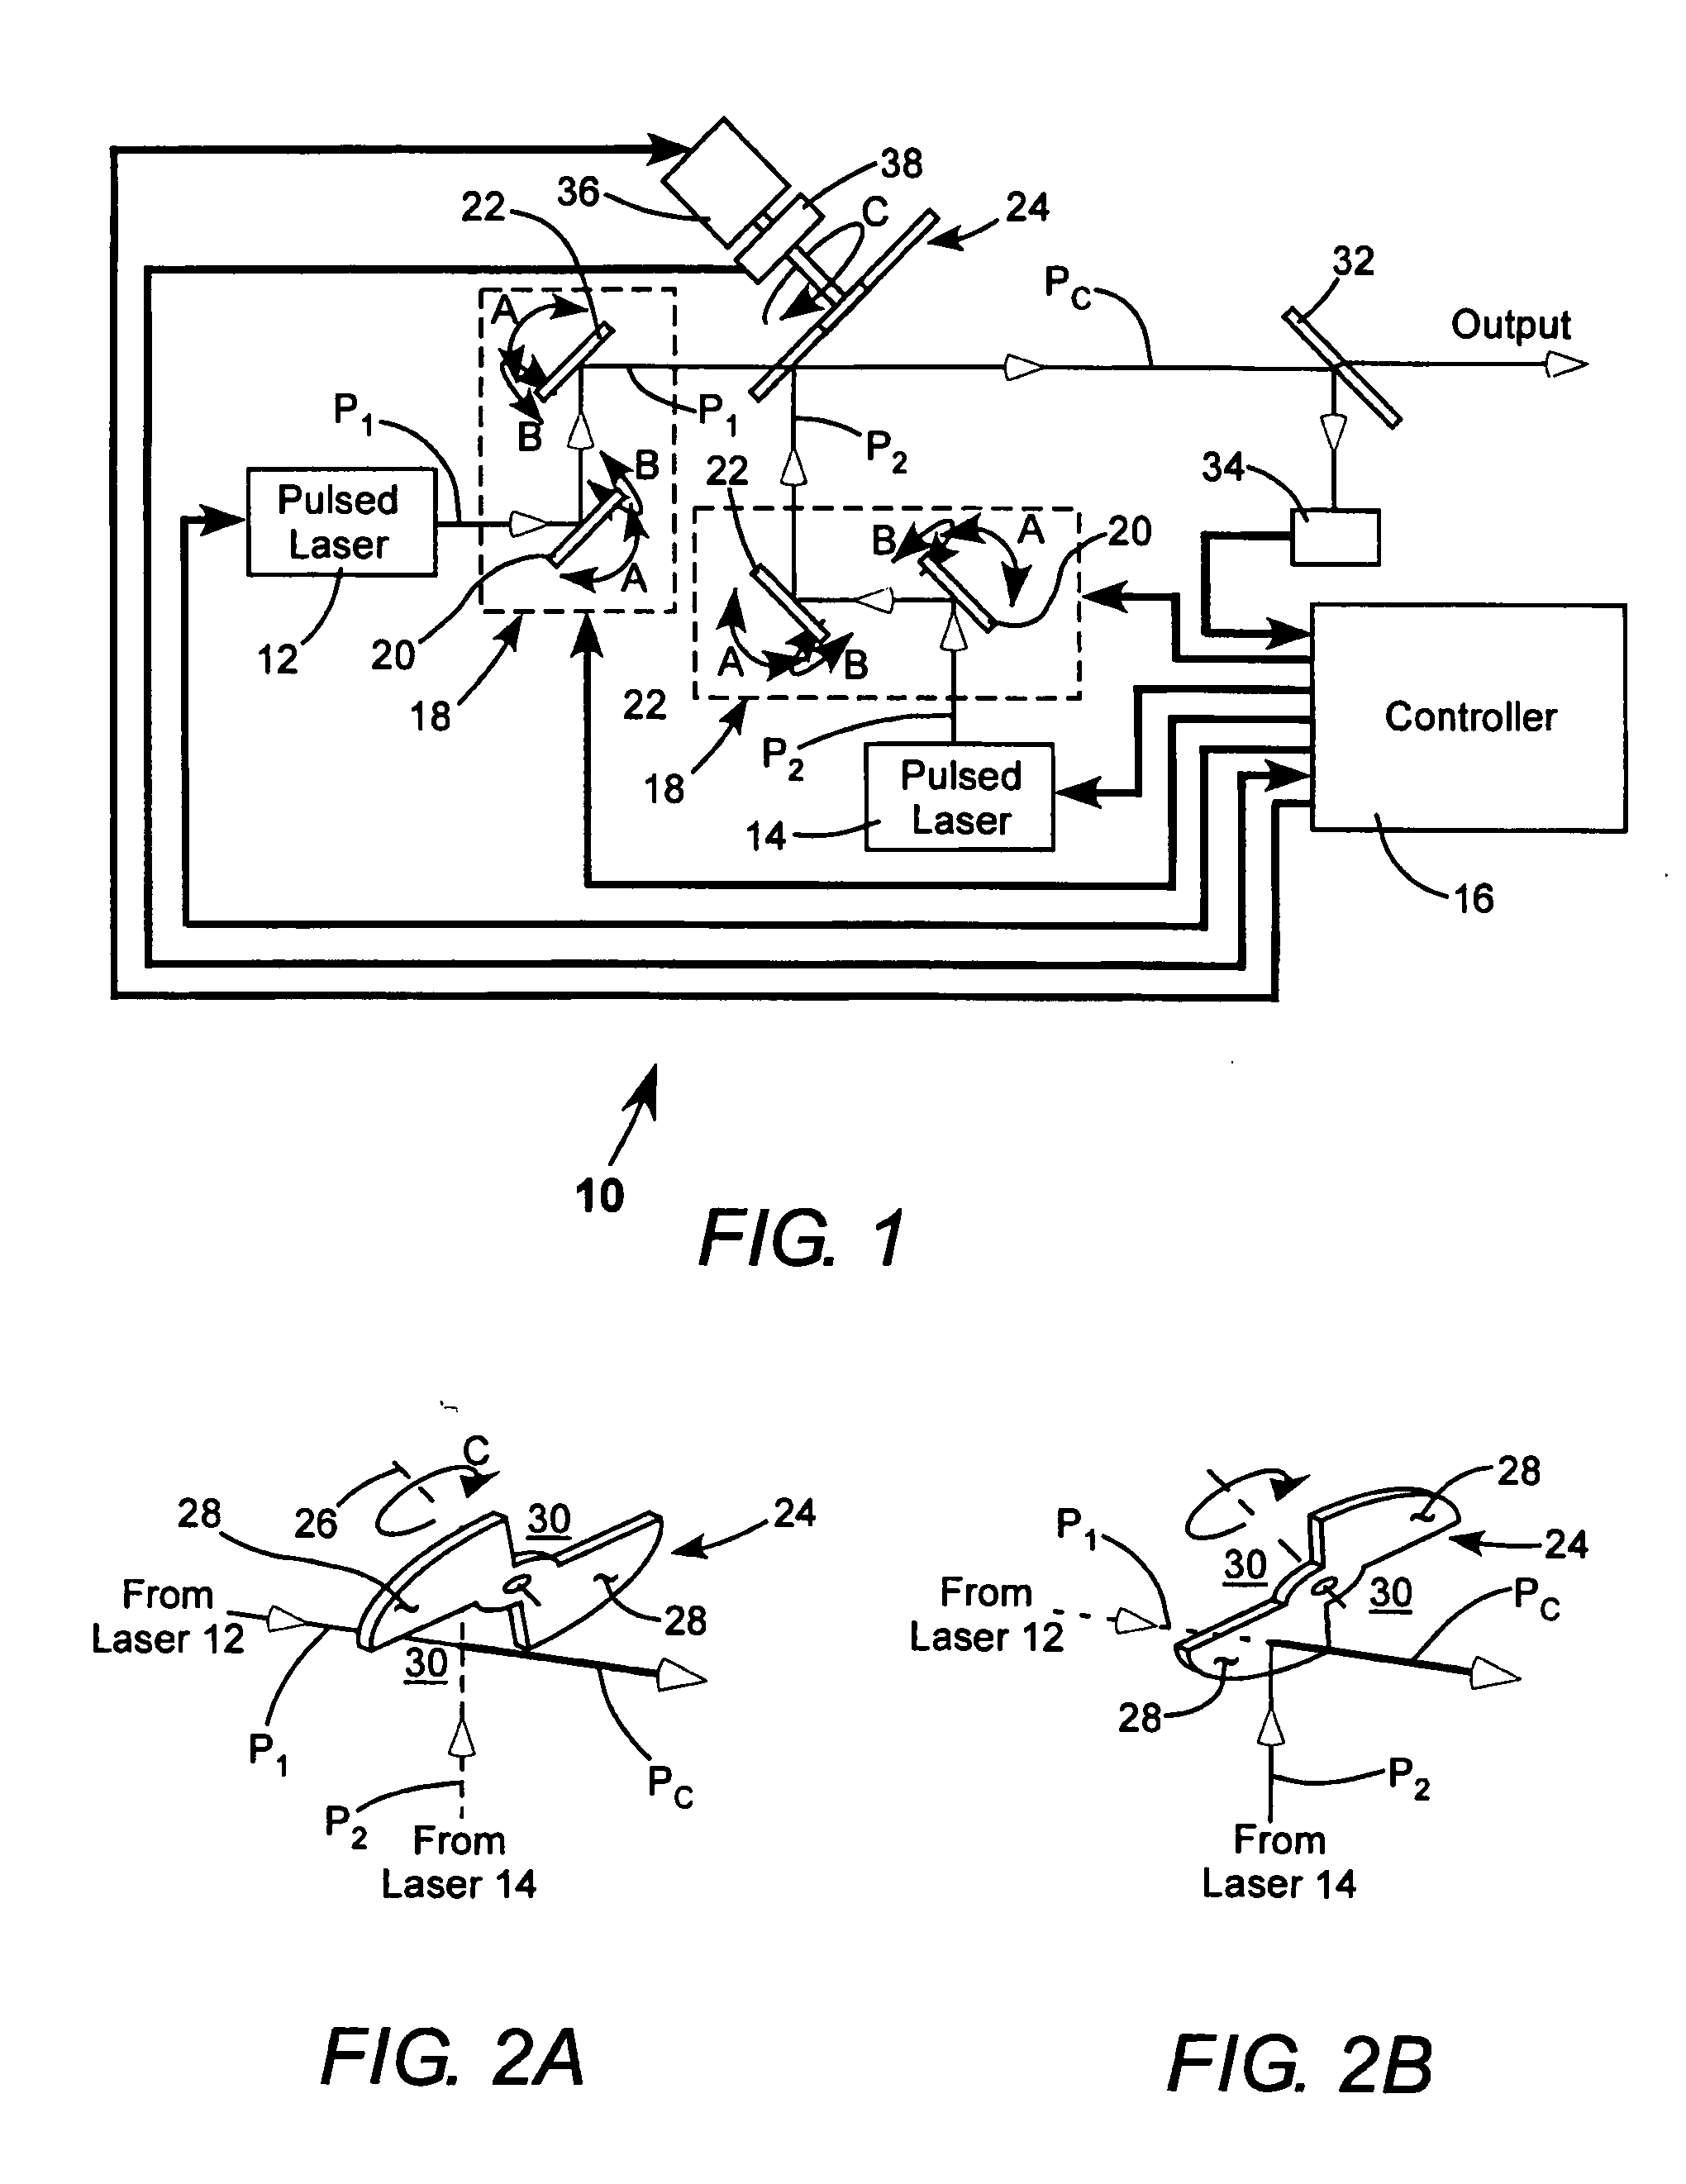 Apparatus for combining beams from repetitively pulsed lasers along a common path